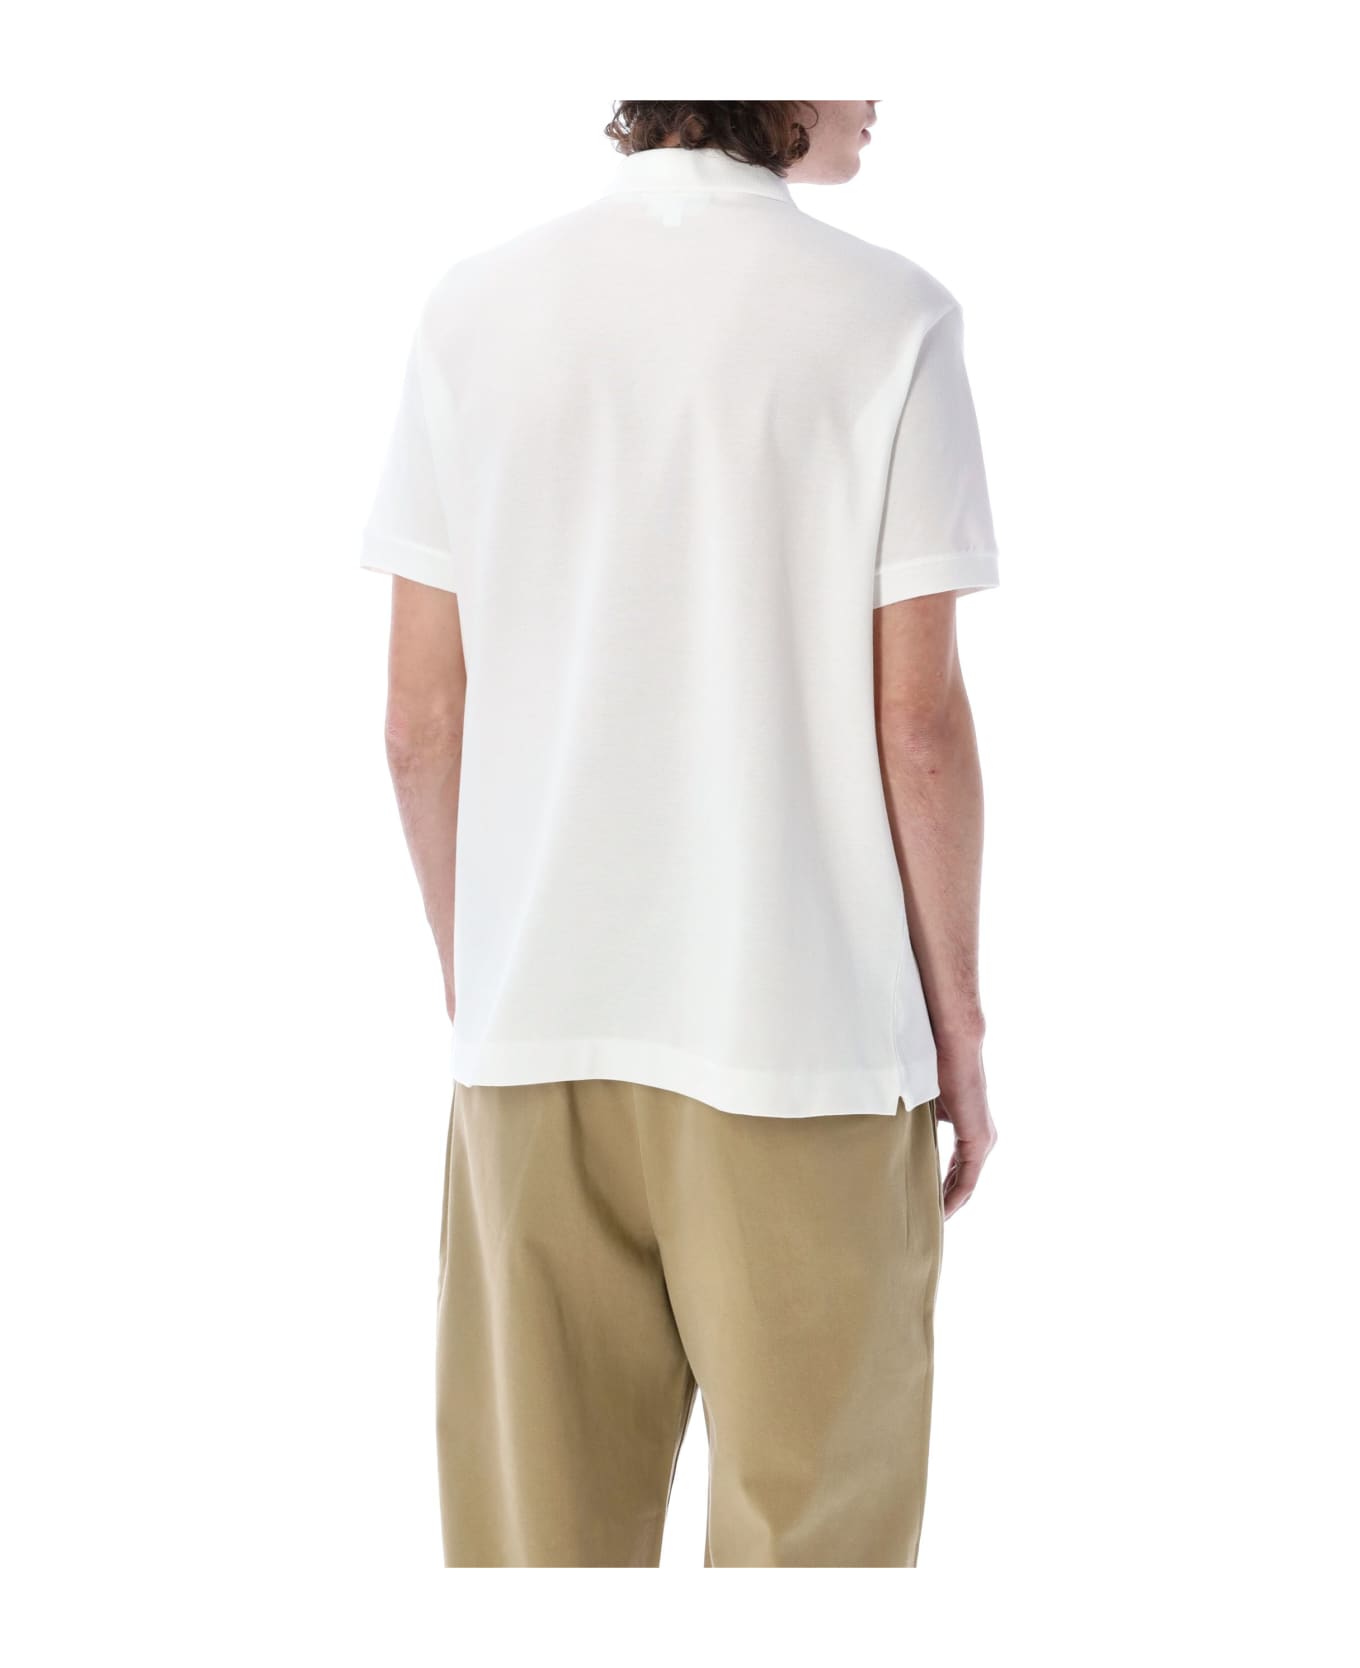 Lacoste Classic Fit Polo Shirt - WHITE ポロシャツ